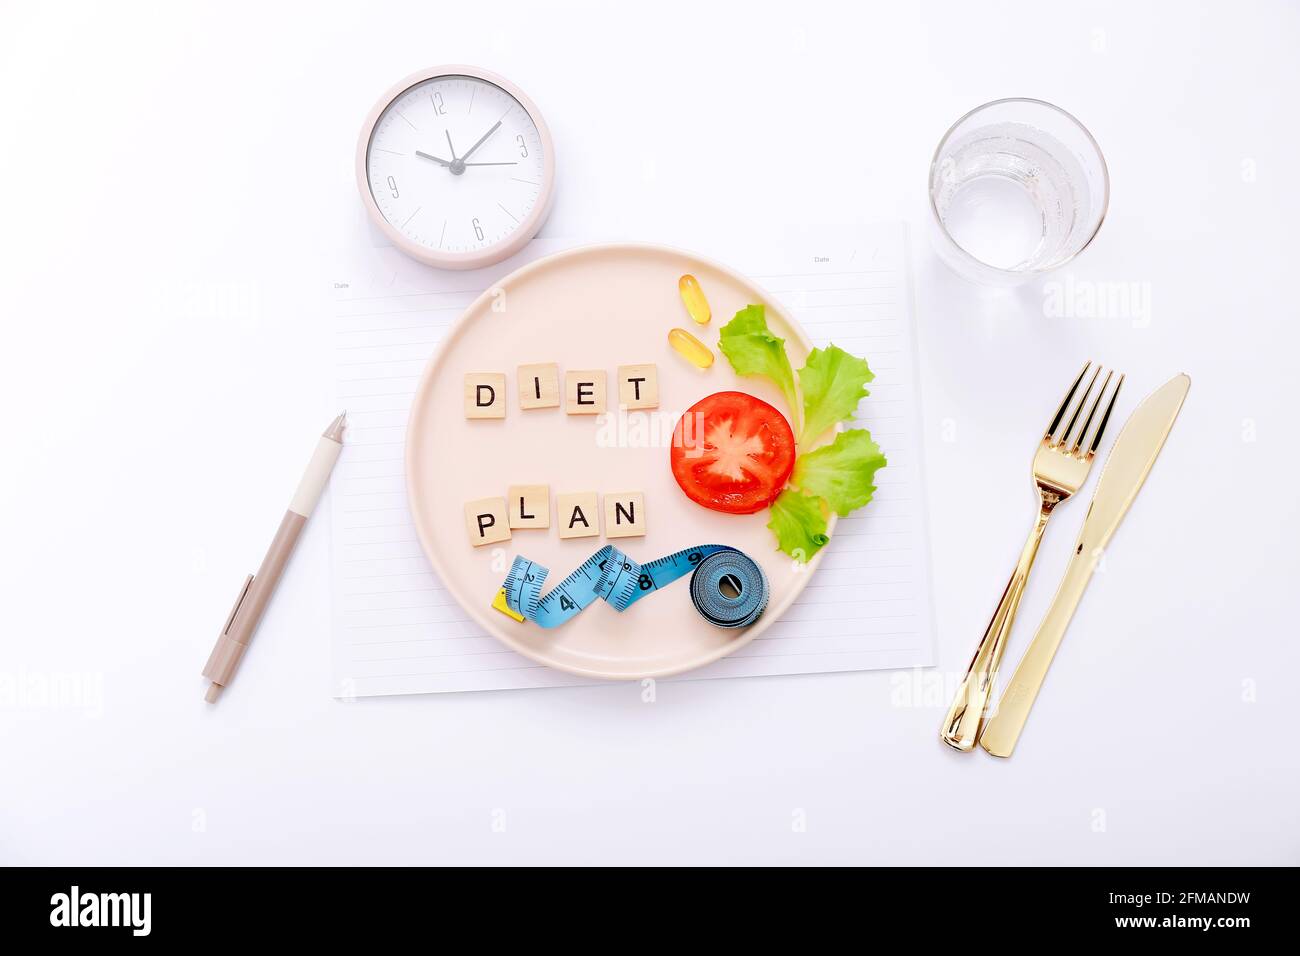 Meal plan. Diet and weight loss concept. View from above. Flat lay Stock Photo